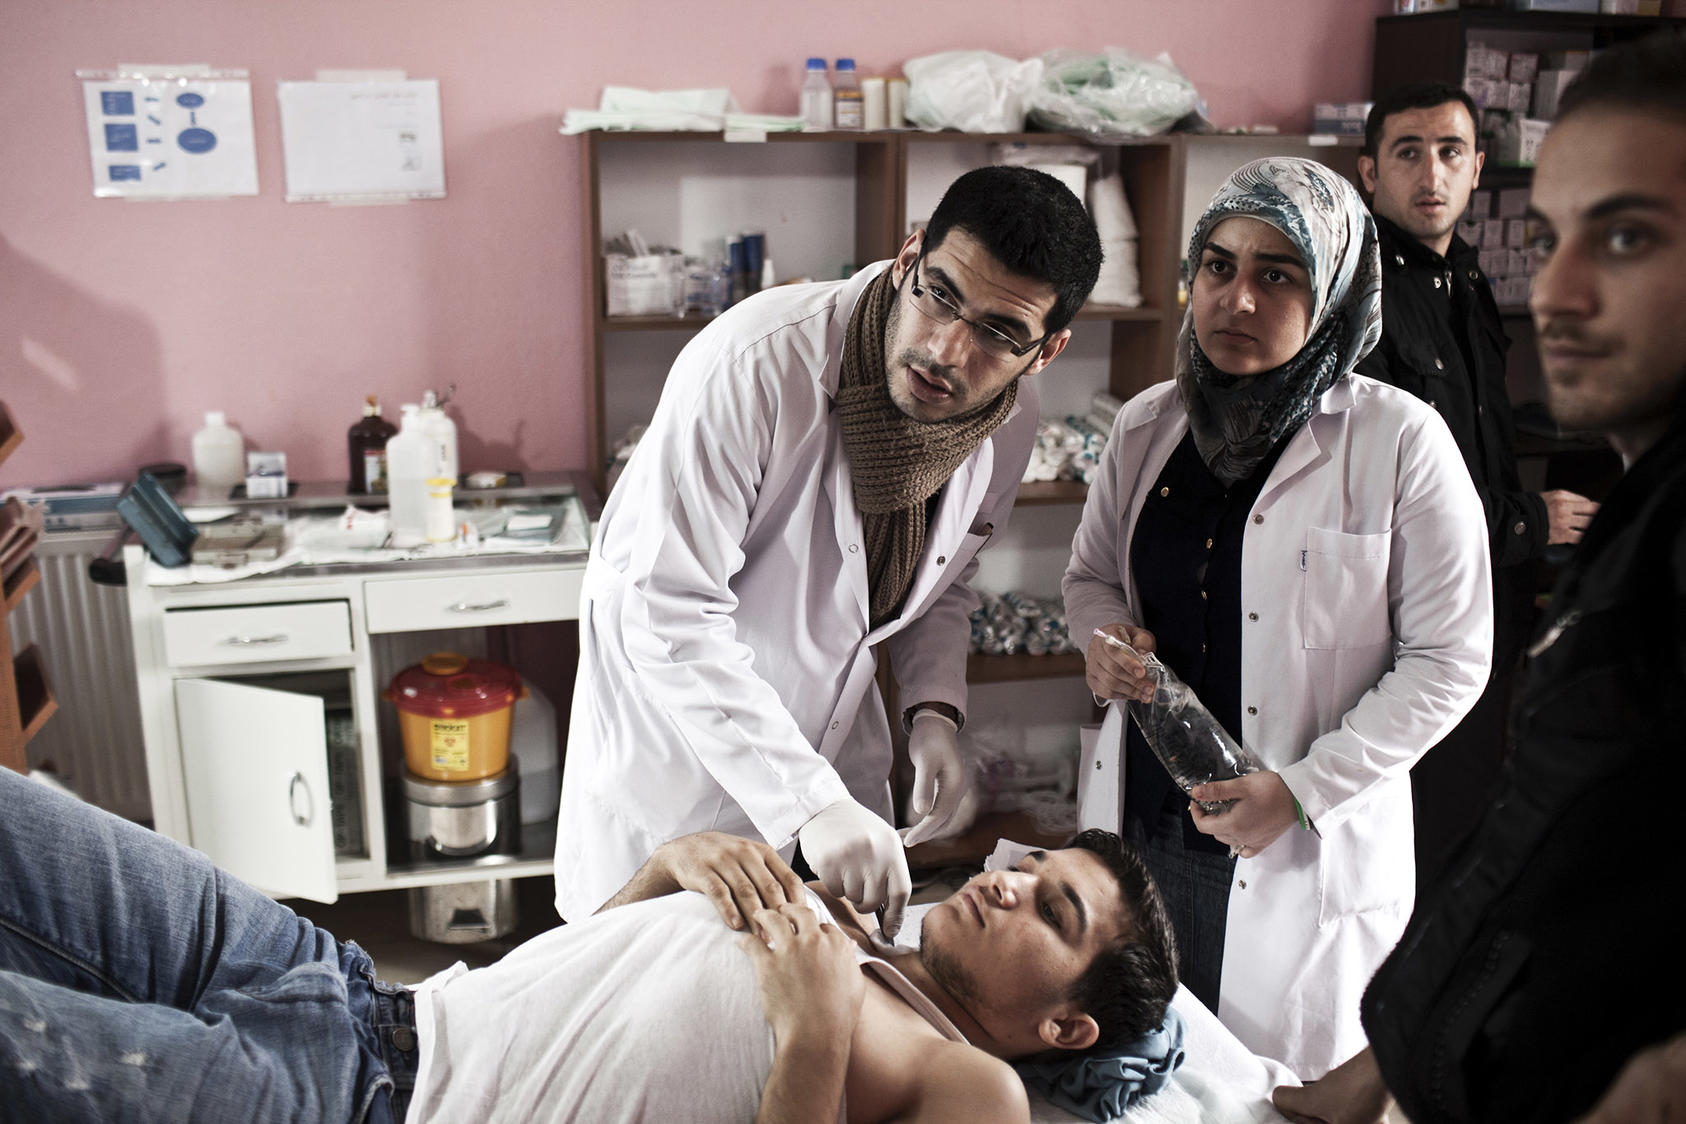 Dr. Housam Moustafa, a surgeon in training who fled Syria, treats a Syrian rebel at a clinic in Reyhanli, Turkey, March 3, 2013. (Daniel Etter/The New York Times)